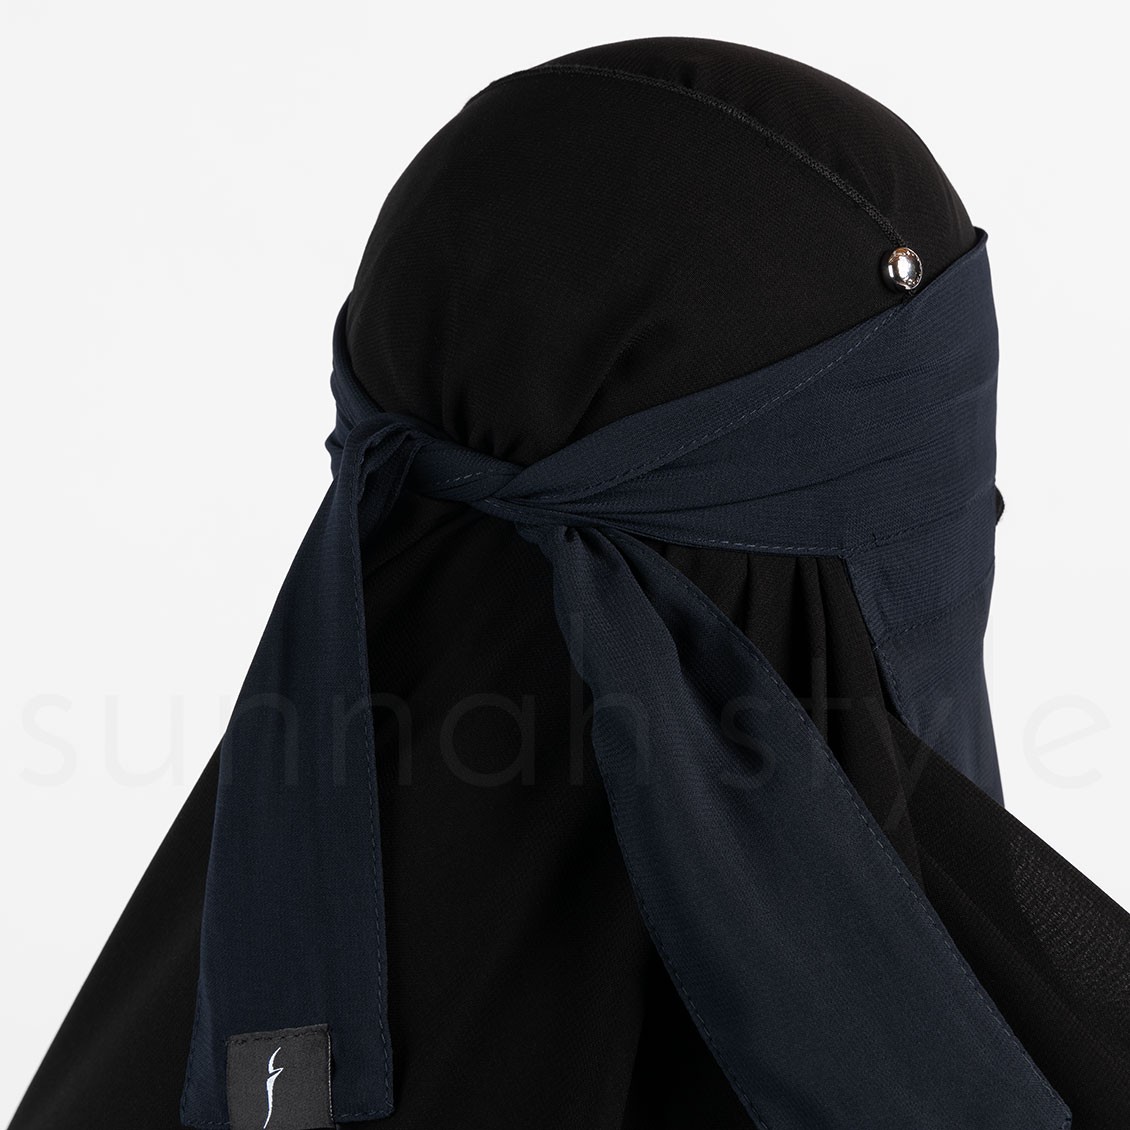 Sunnah Style No-Pinch One Layer Niqab Navy Blue